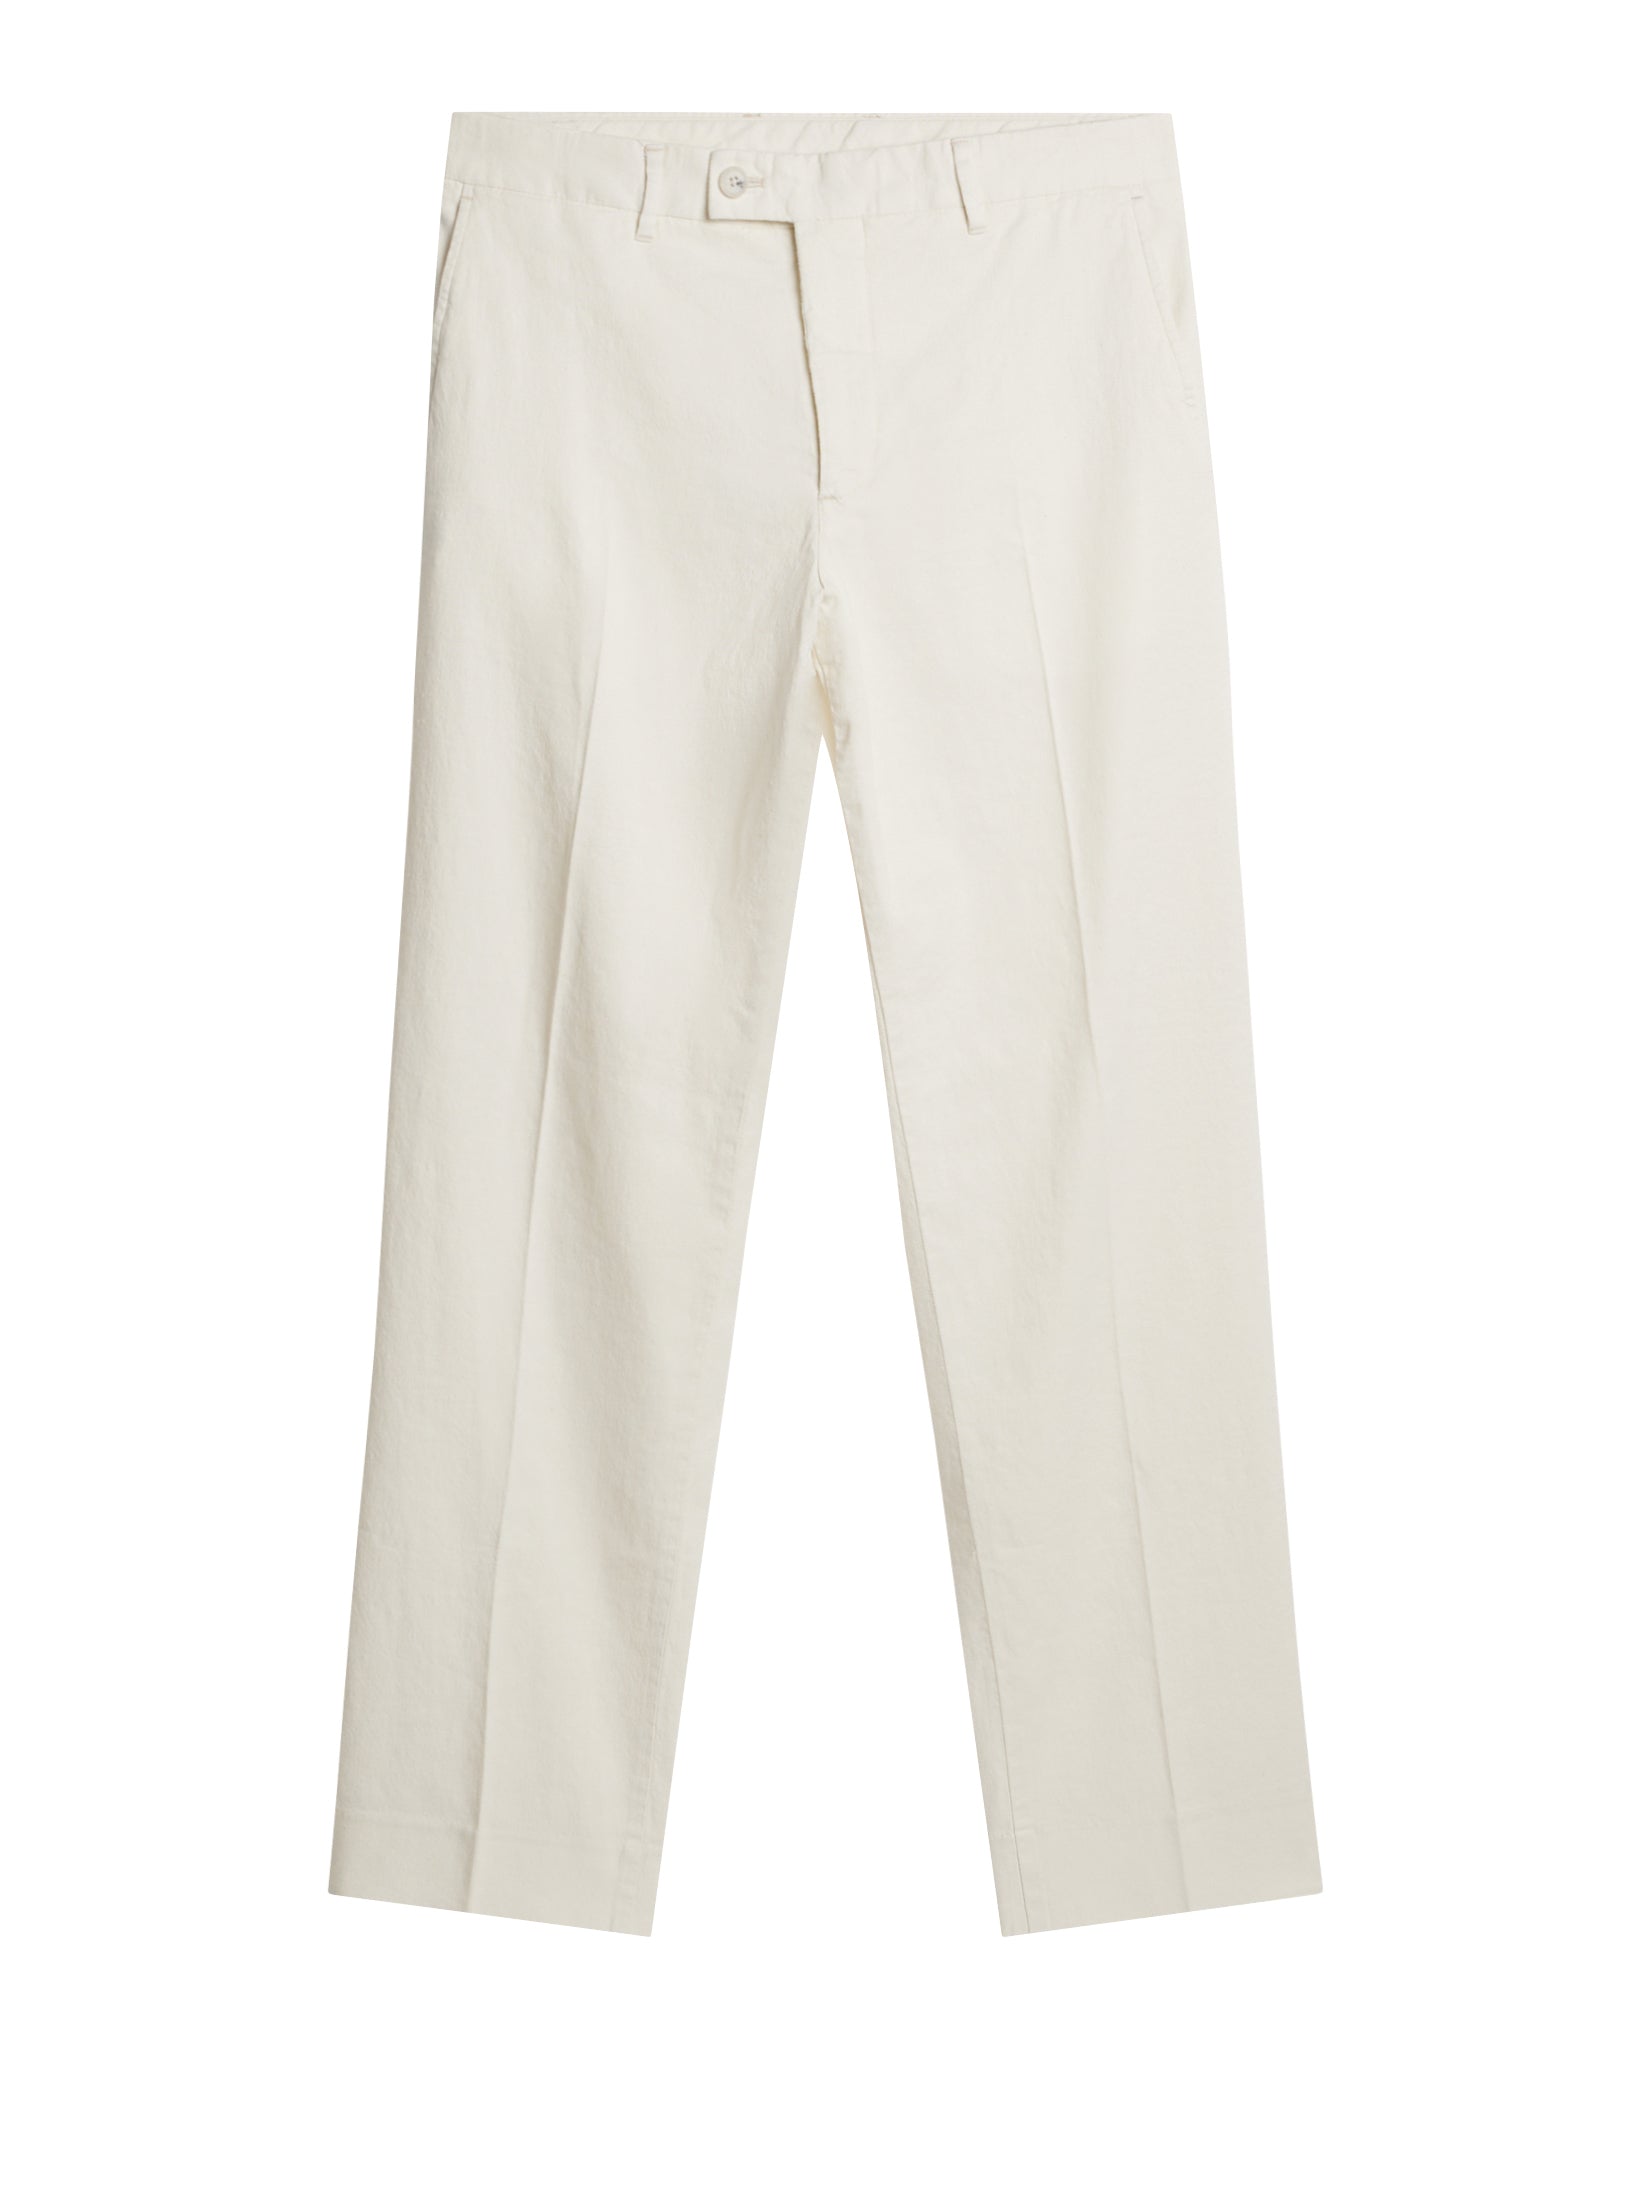 High-Quality Men's Trousers - J.Lindeberg